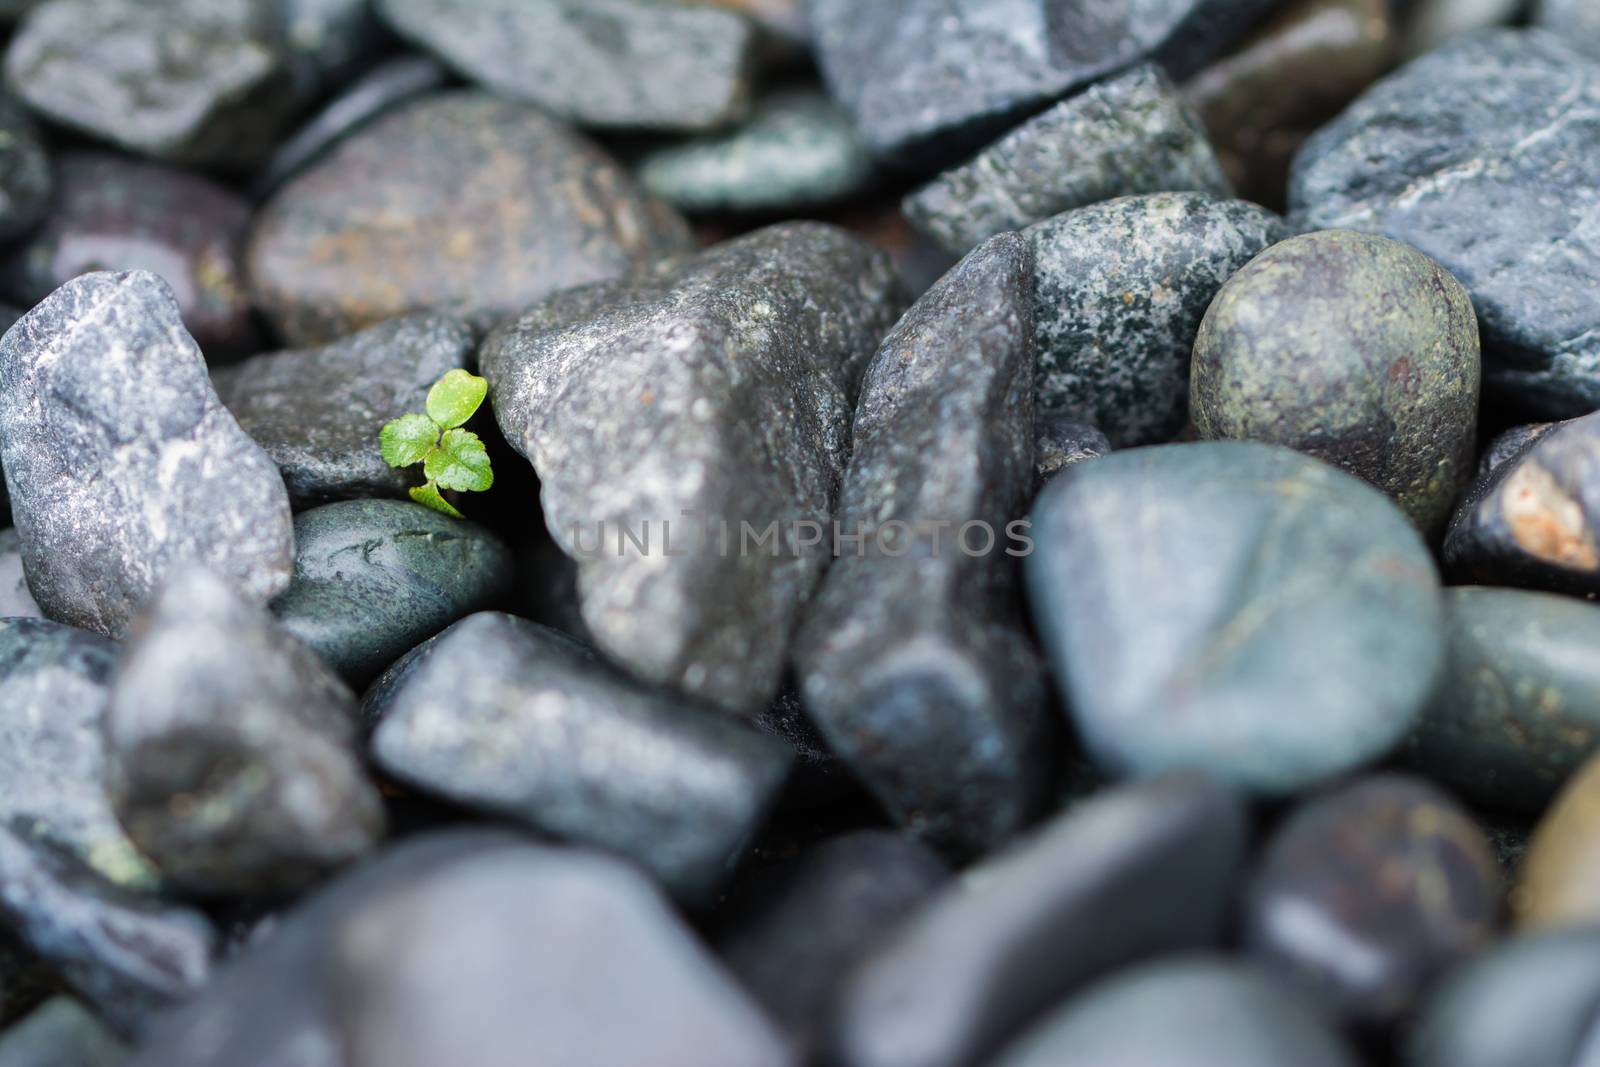 A few leaves from a small green plant growing and pushing through big heavy black rocks.